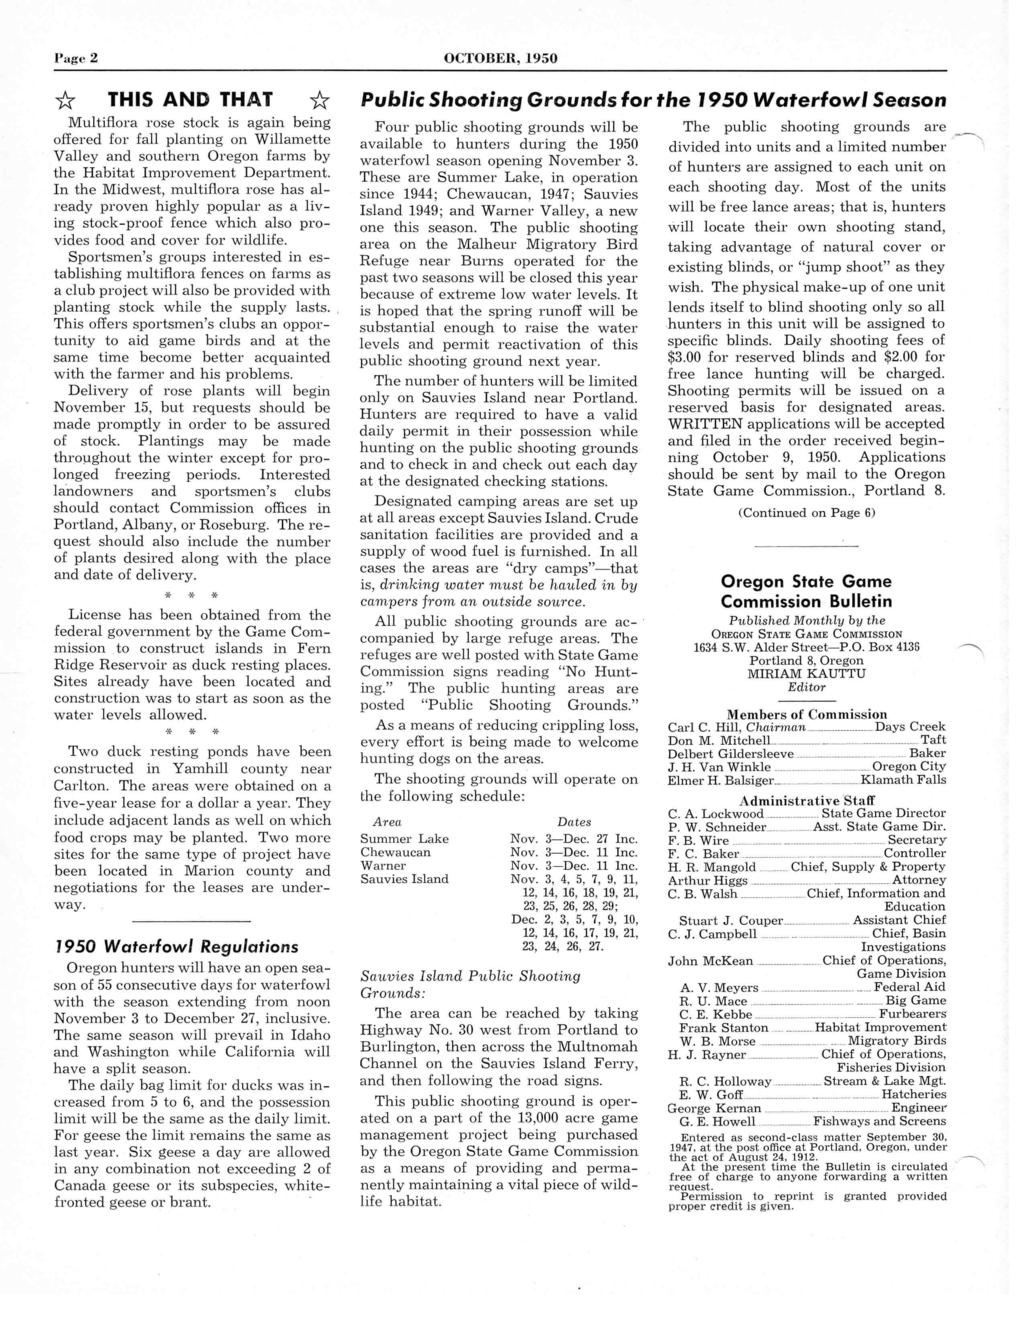 Page 2 OCTOBER, 1950 * THIS AND THAT * Public Shooting Grounds for the 1950 Waterfowl Season Multiflora rose stock is again being offered for fall planting on Willamette Valley and southern Oregon